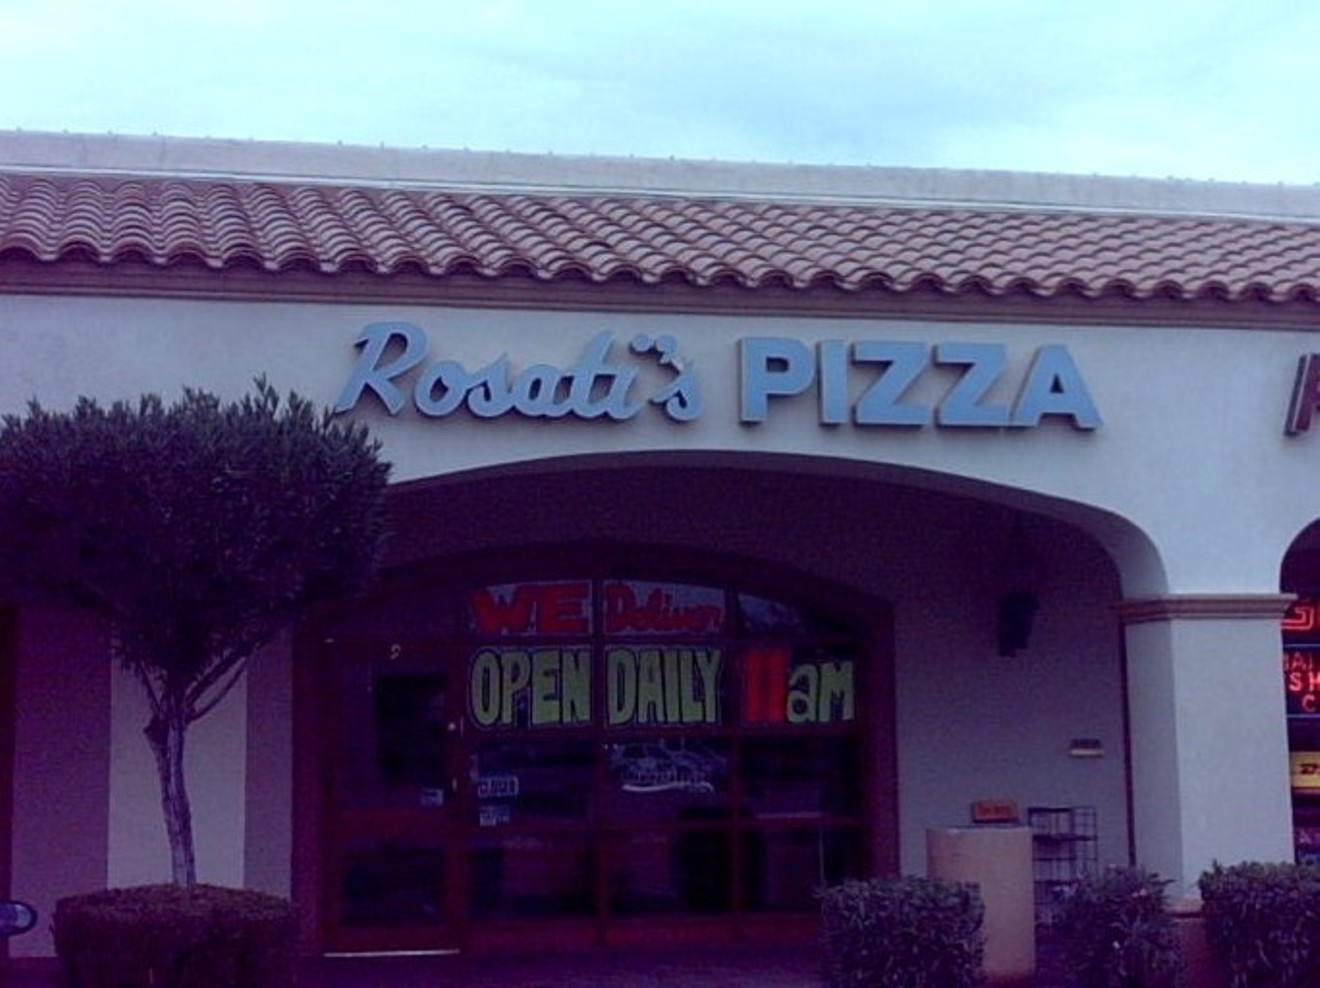 Rosati's Pizza has been in operation in Arizona since 1986.